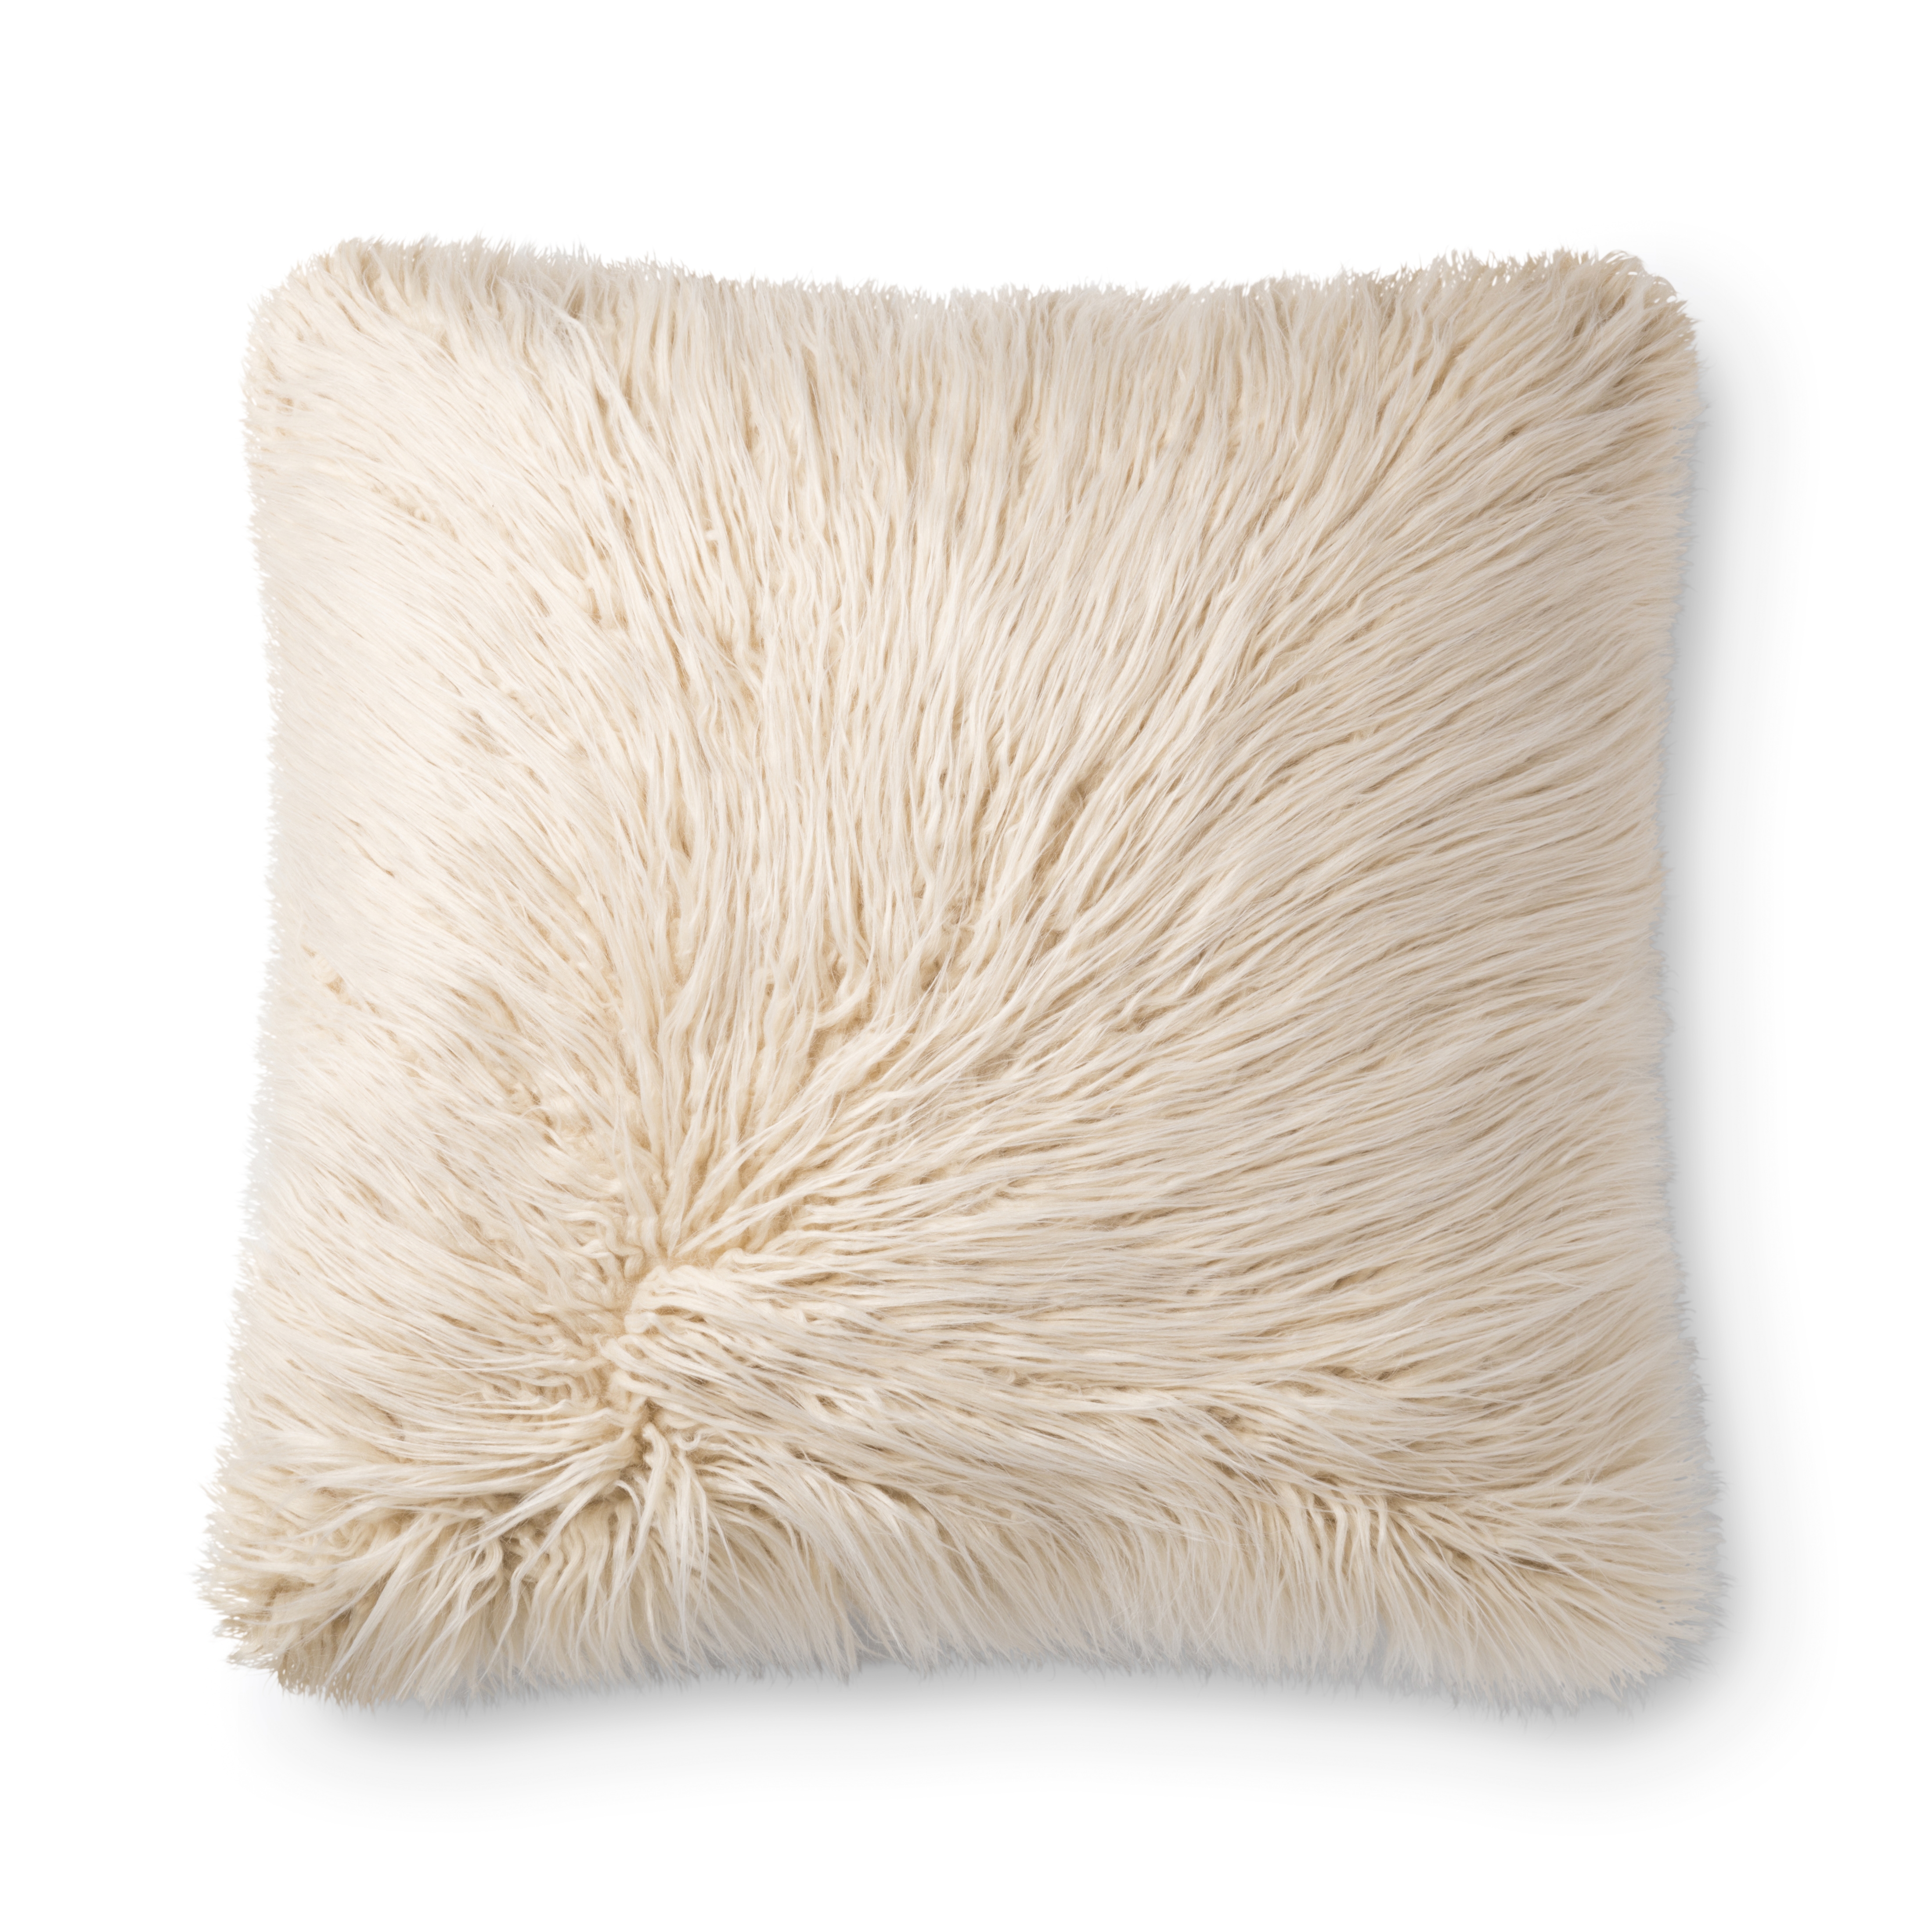 Loloi PILLOWS P0790 Multi / Ivory 22" x 22" Cover Only - Image 1